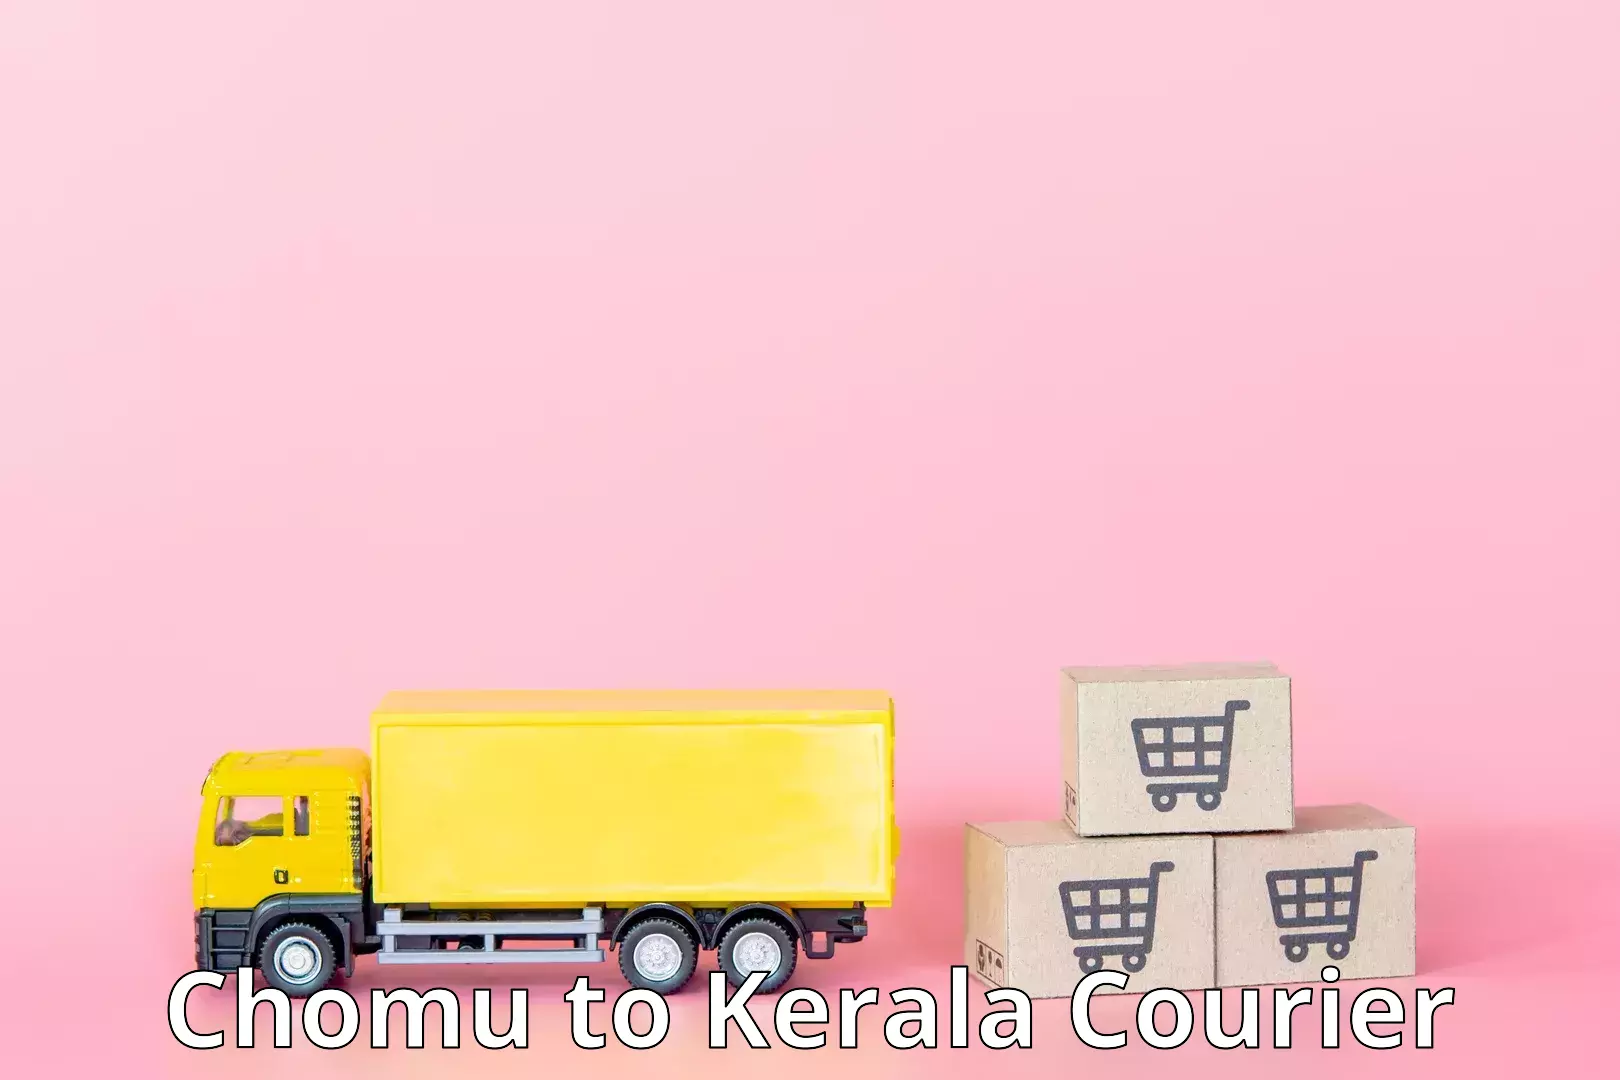 Reliable parcel services Chomu to Kerala